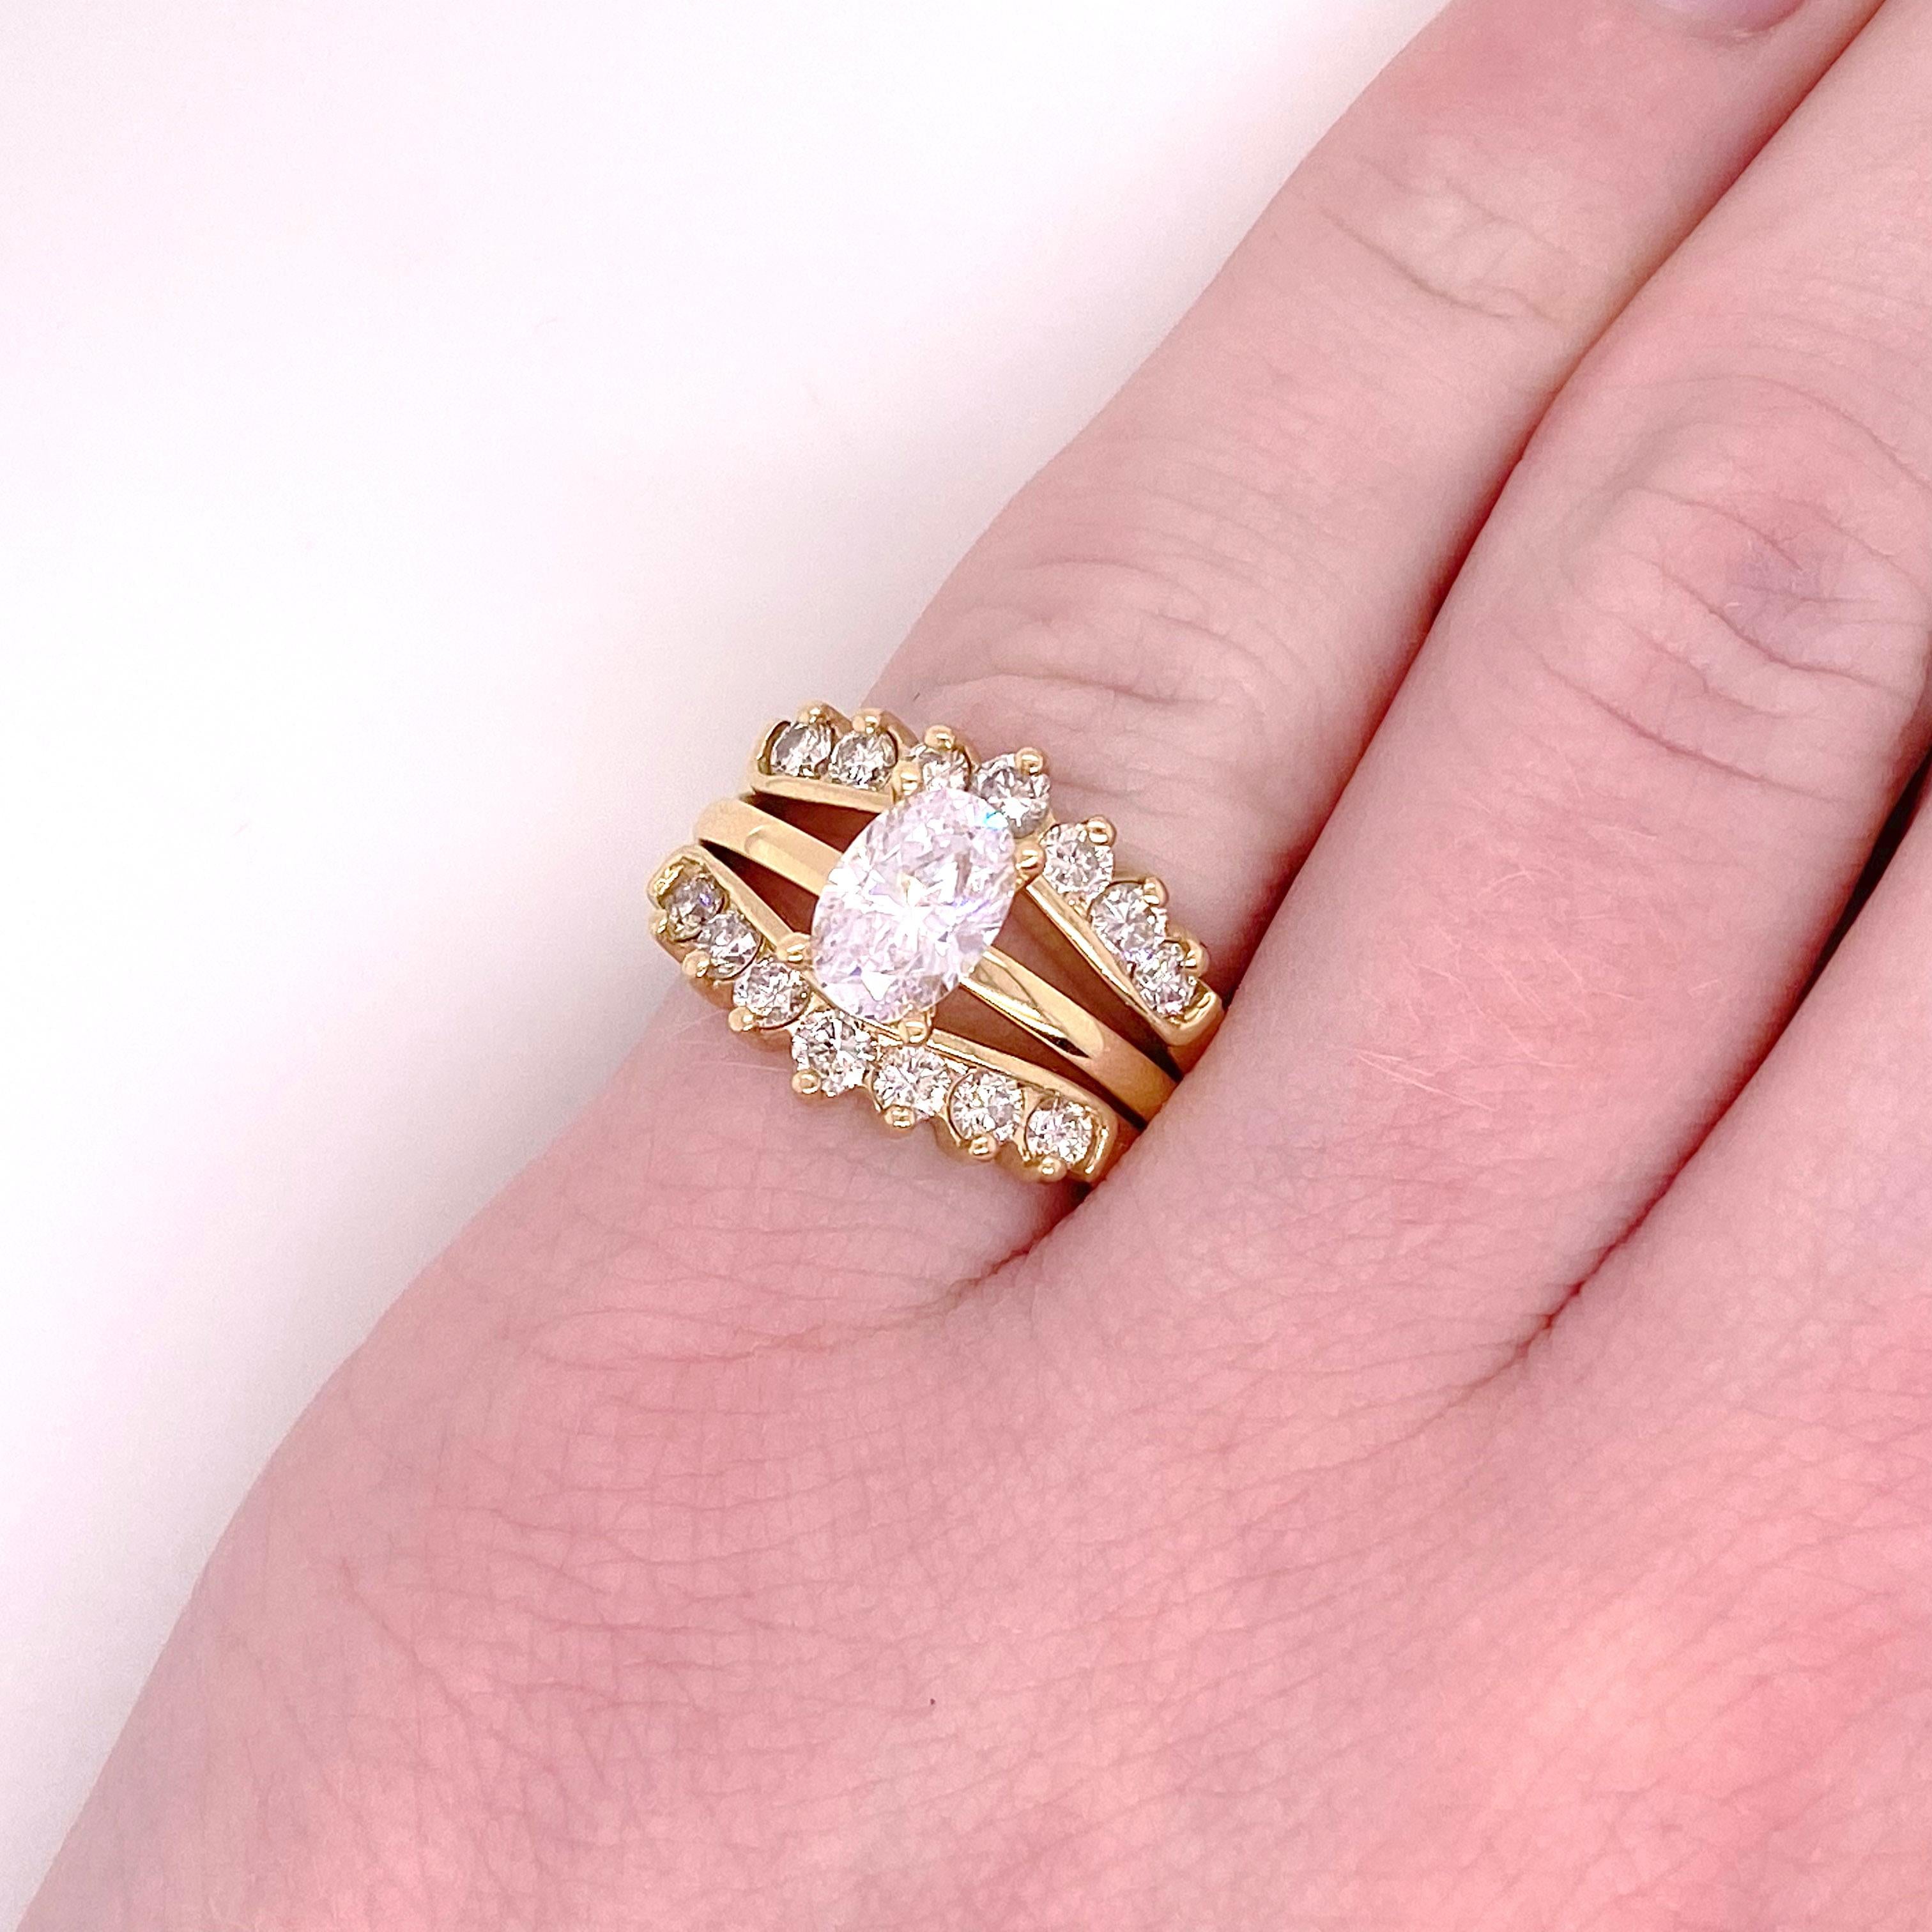 Contemporary One Carat Diamond Ring Enhancer, Yellow Gold Ring Jacket w 14 Diamonds For Sale